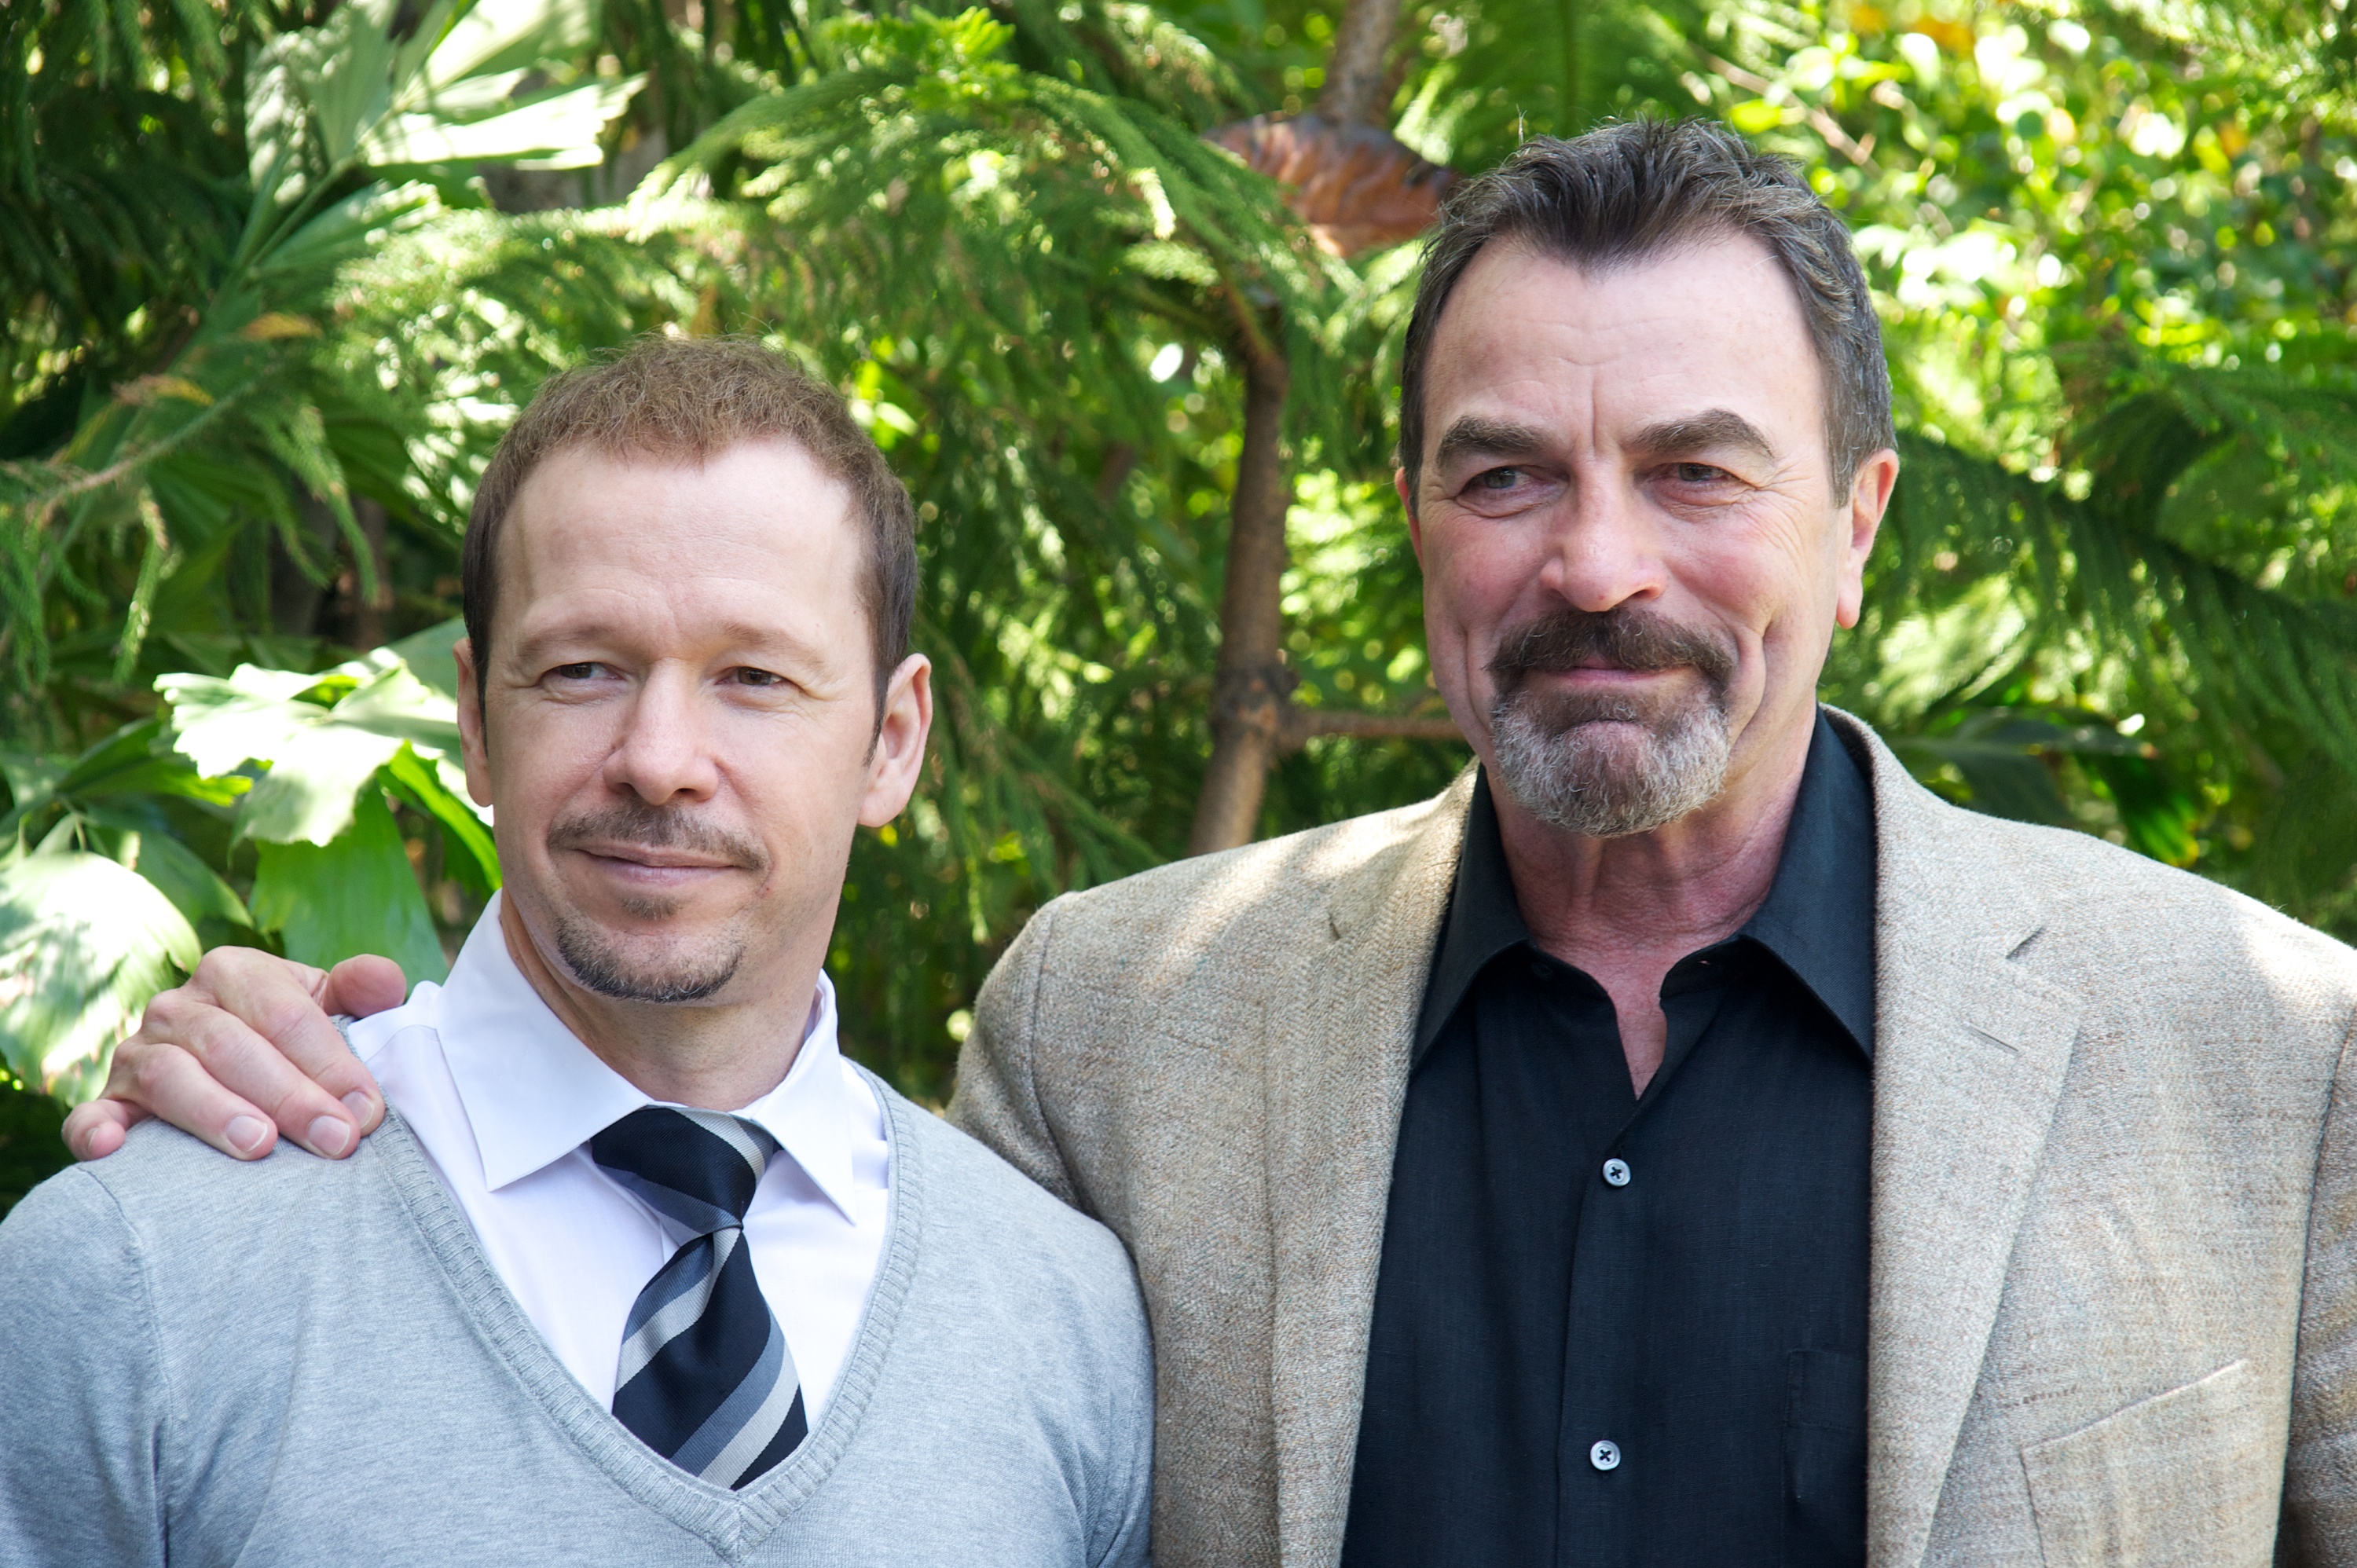 Donnie Wahlberg and Tom Selleck in Beverly Hills, California on June 6, 2012 | Source: Getty Images